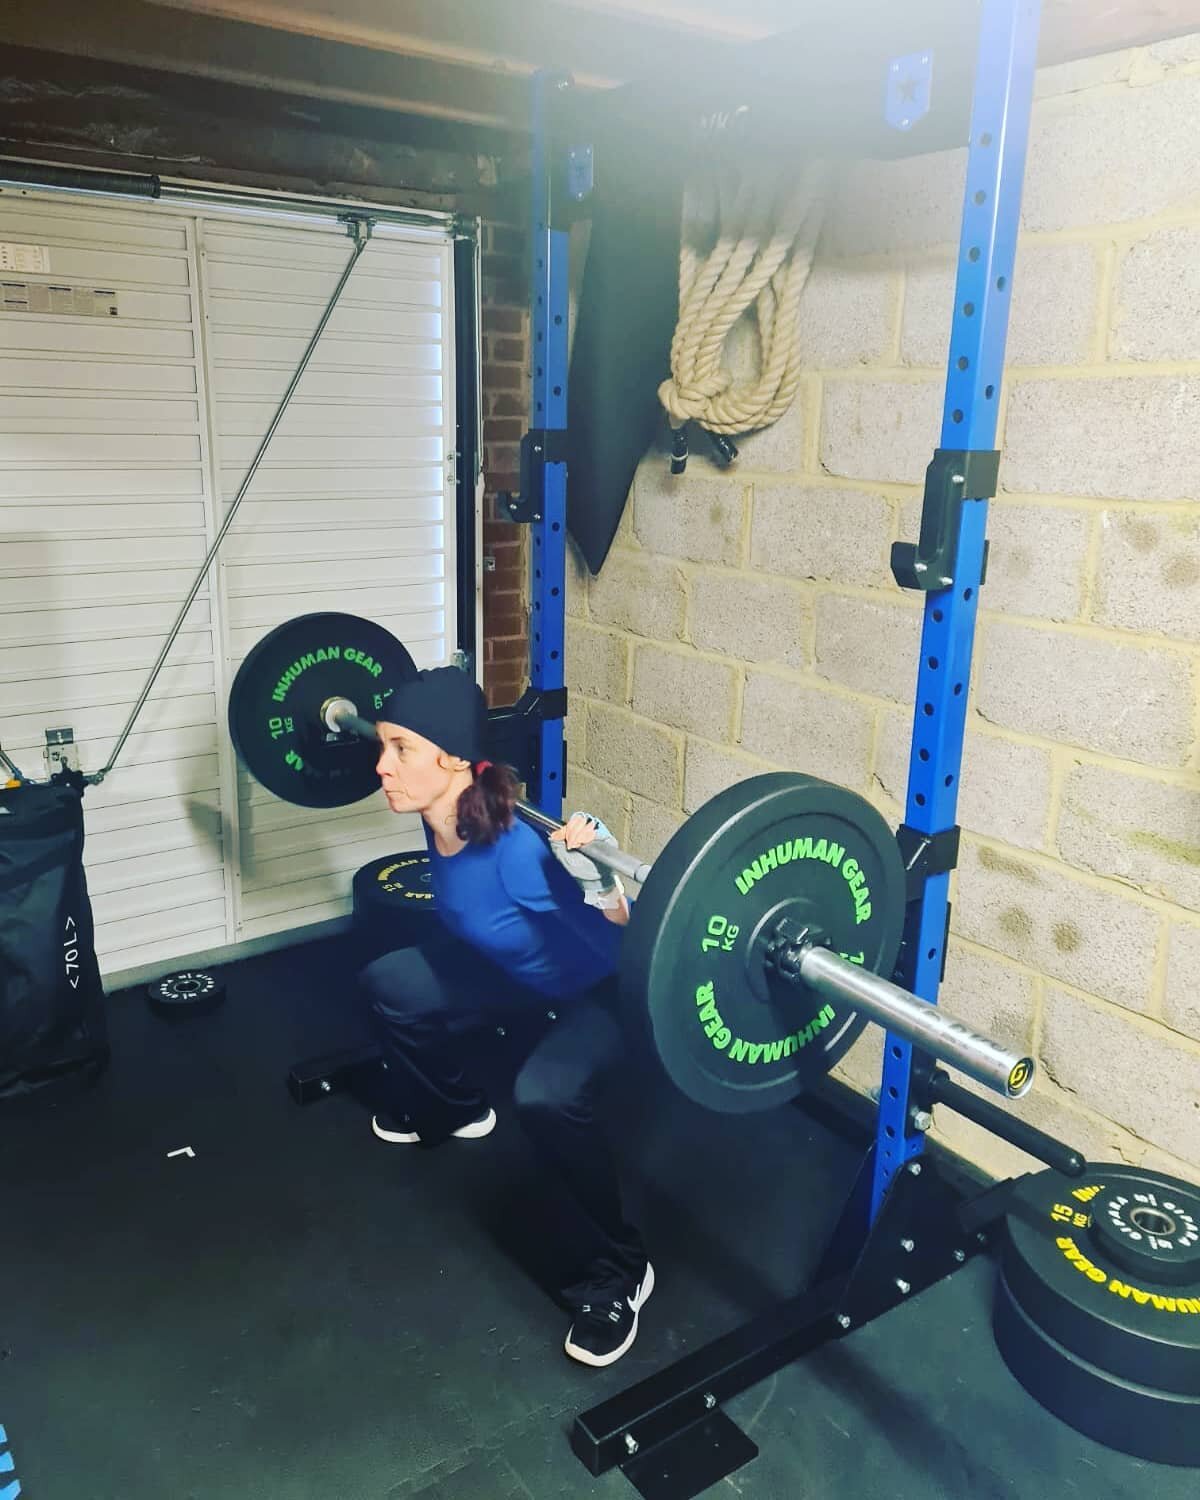 Winter warm up. LOVE having my NEW custom made Christina Bohane Fitness blue squat rack and all the kit to get back into lifting heavy pre-baby weights💪 

I do what I preach...taking it easy after 10 months break.

HUGE THANK YOU TO WKG Sports!!!

#